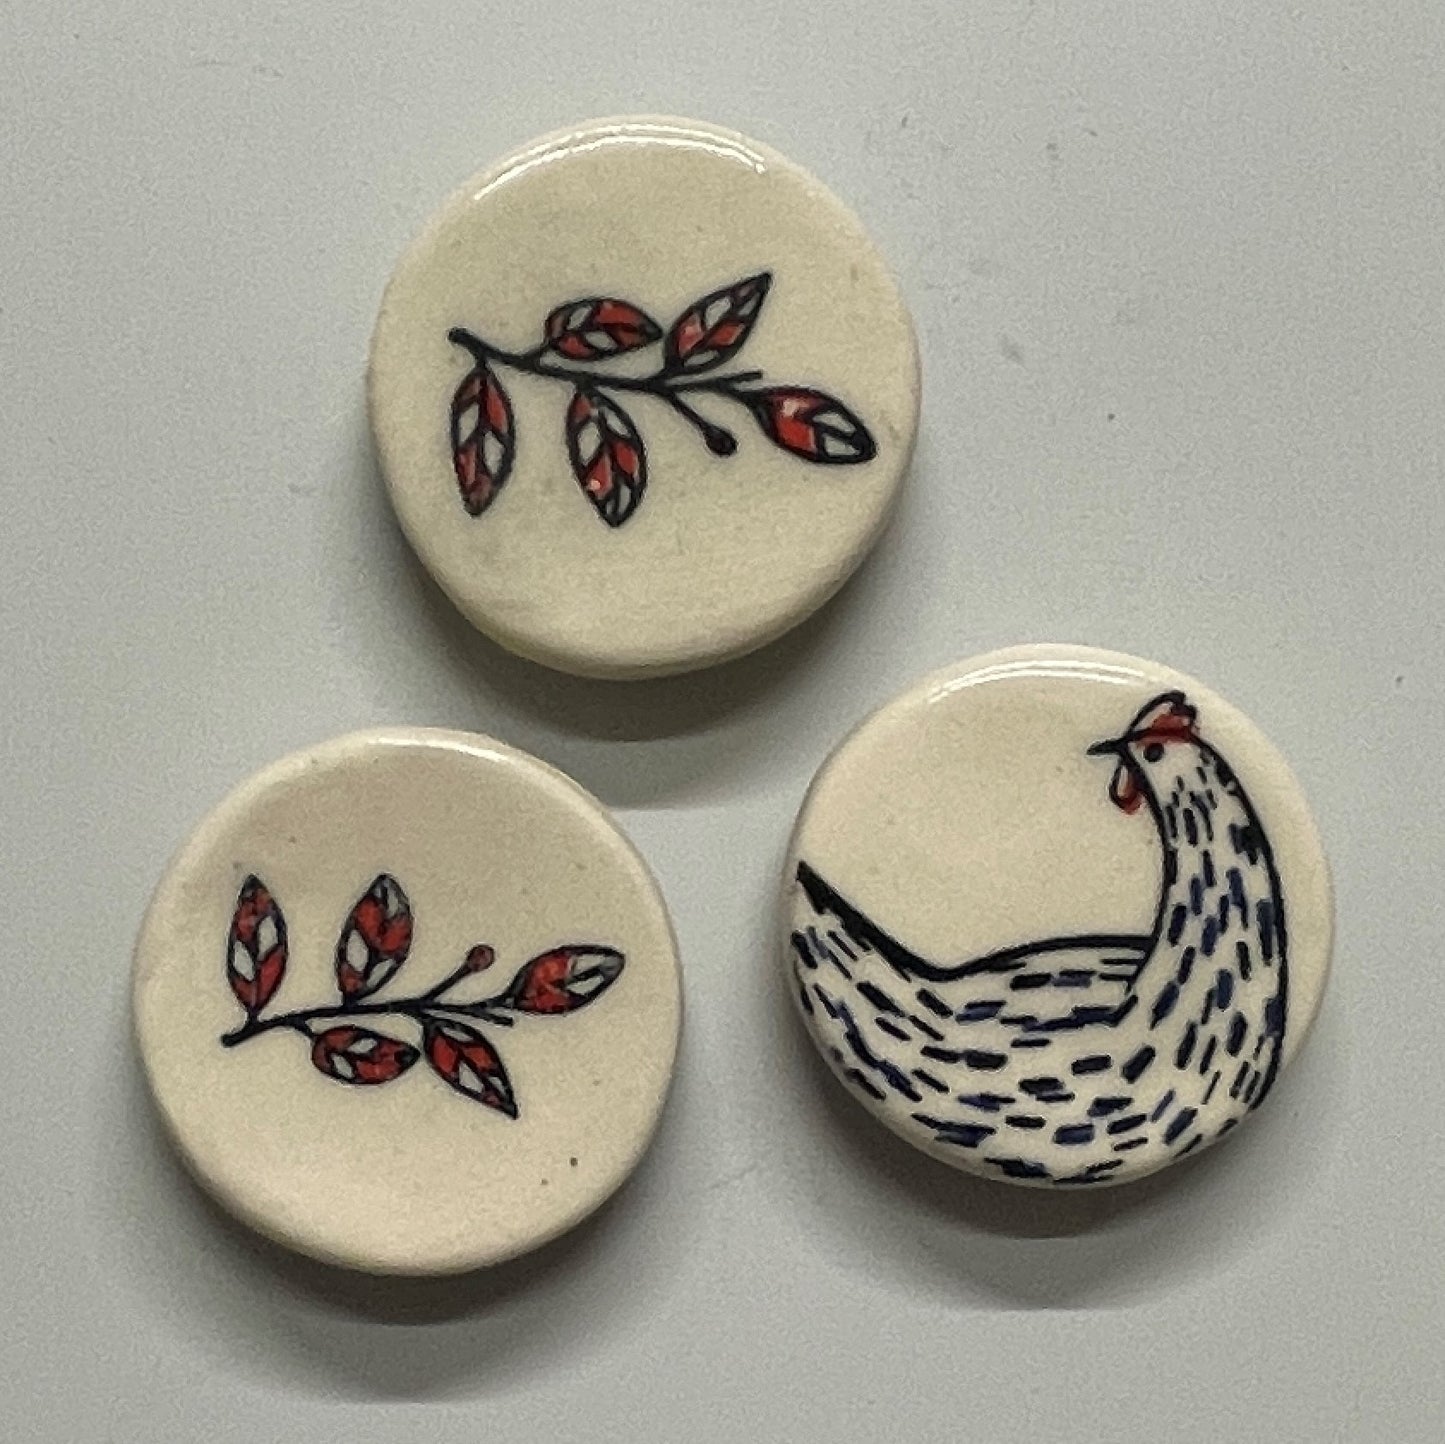 Blue Chicken and Branch Magnets - Set of 3